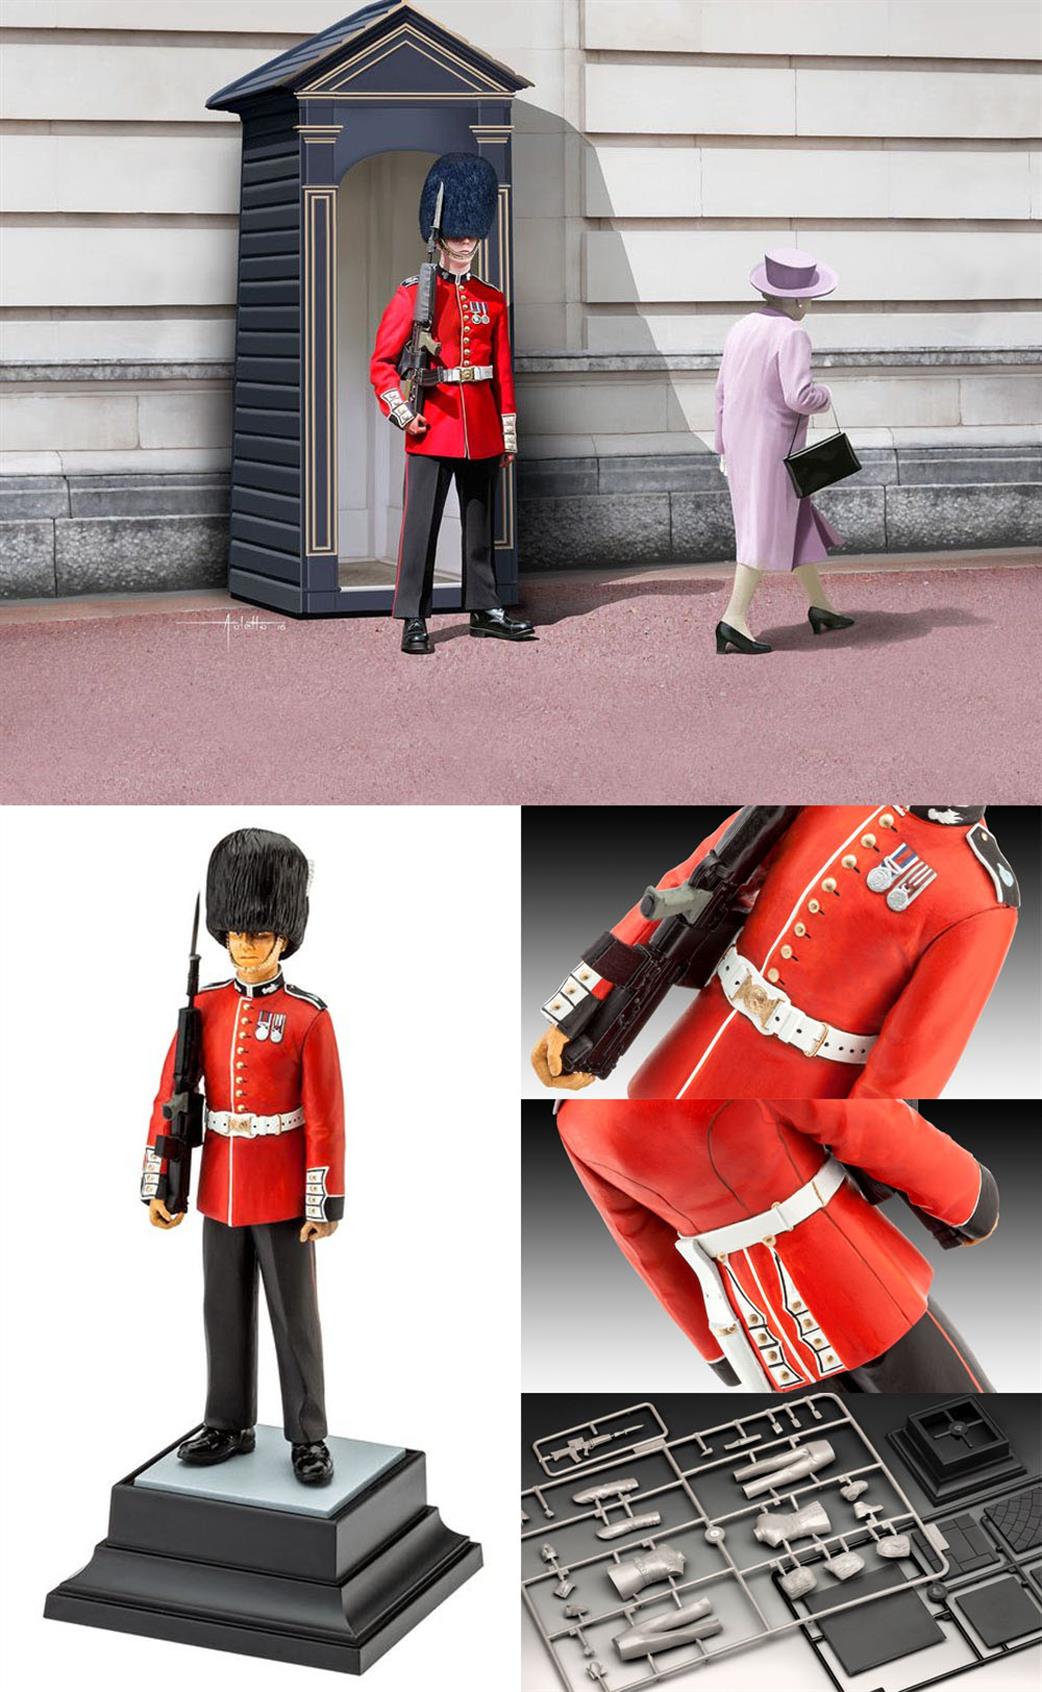 Revell 1/16 02800 Queen's Guard Figure Kit